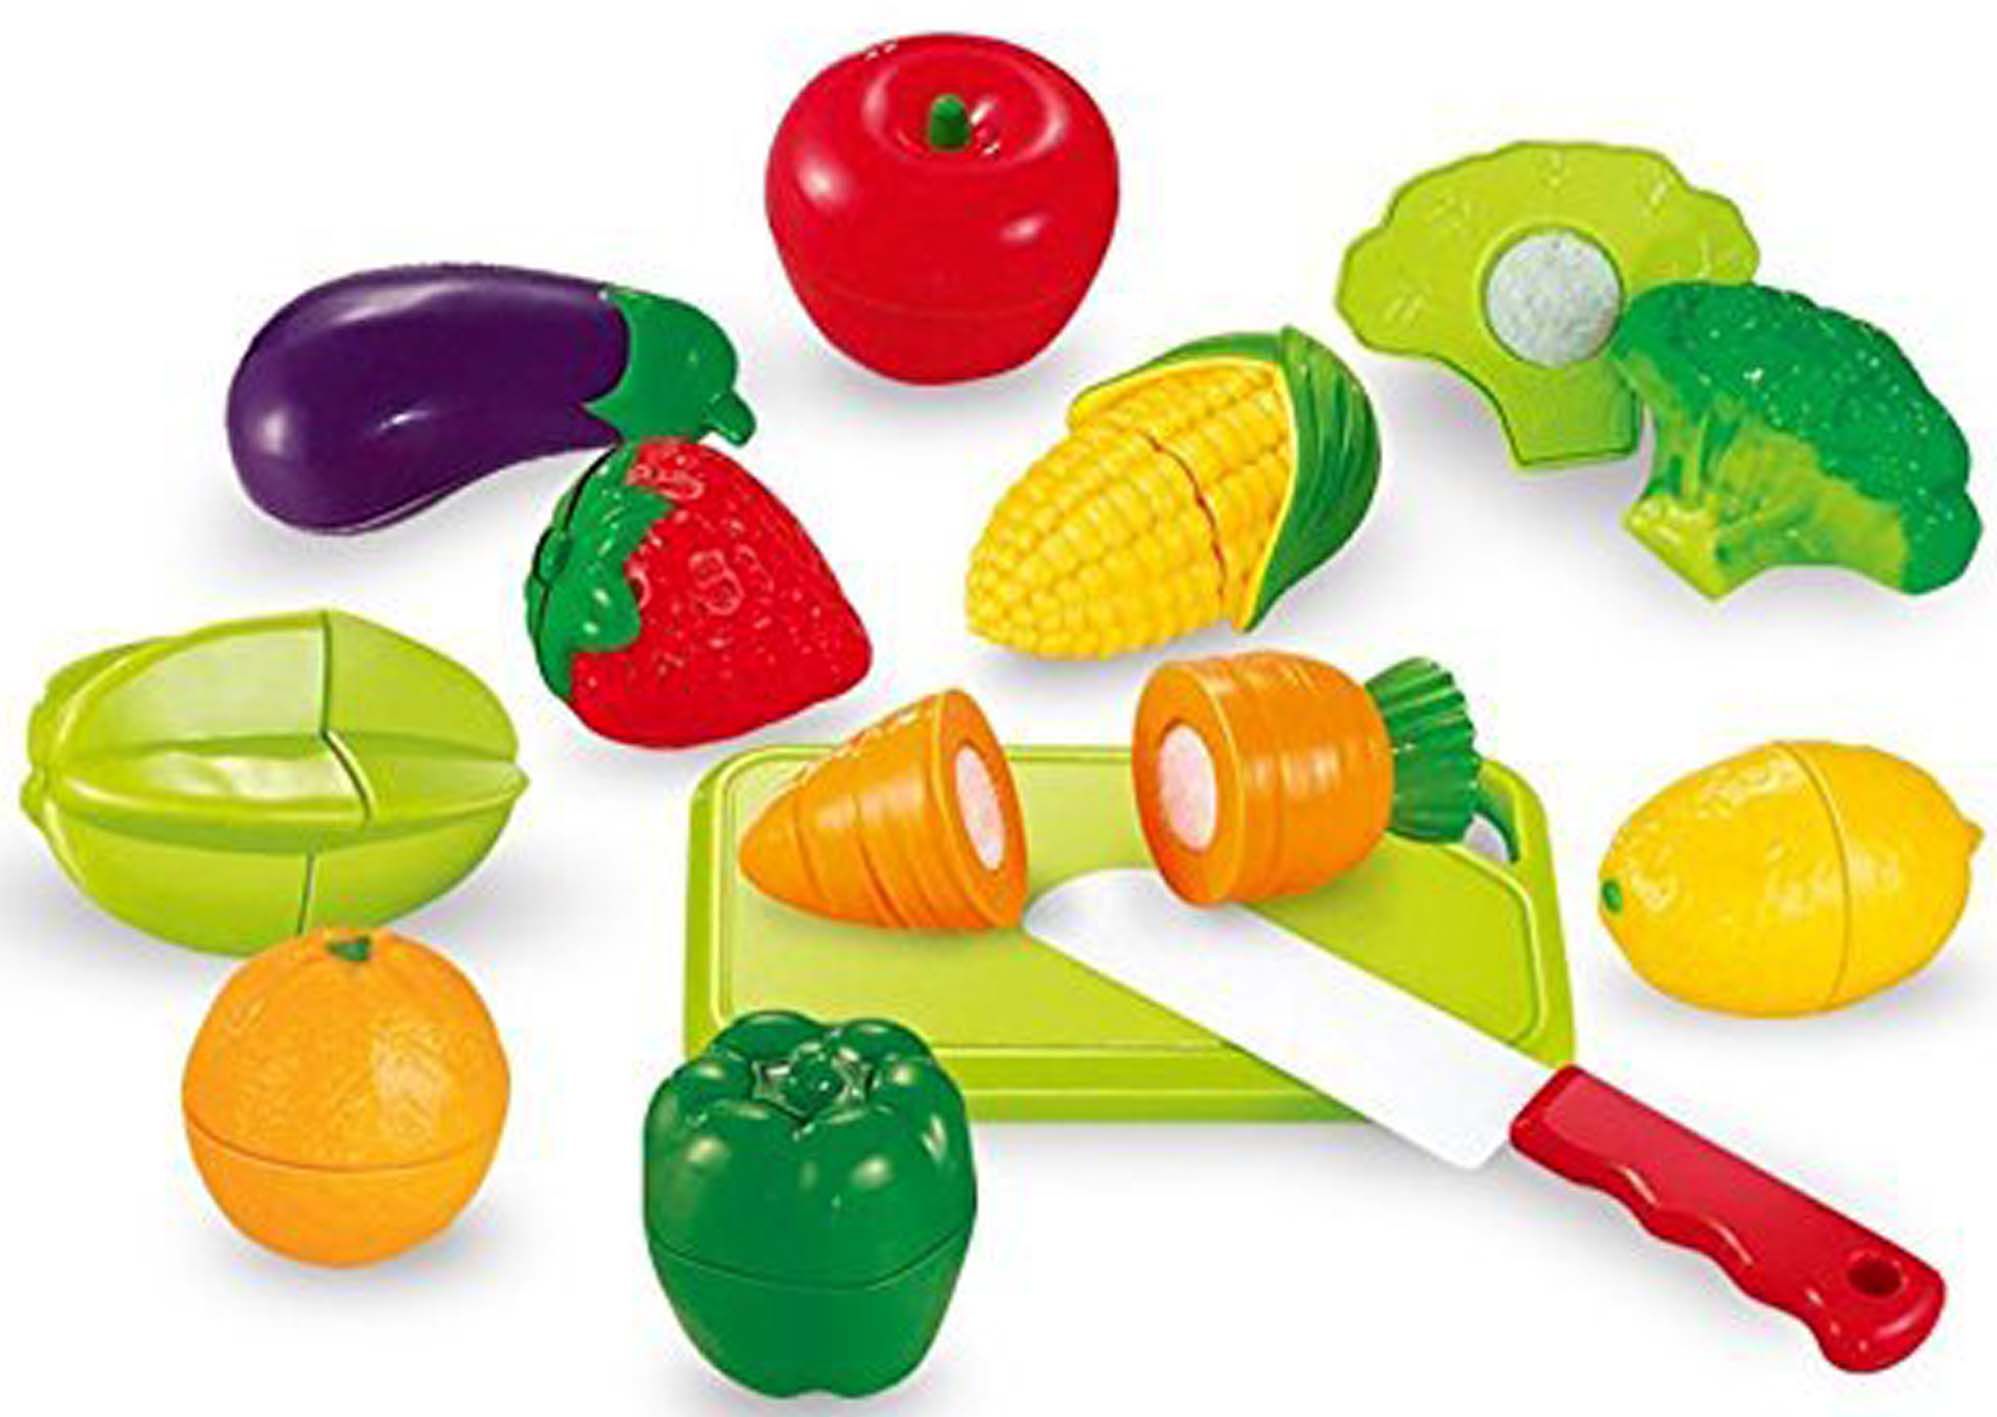 Bonkerz Realistic Sliceable Vegetable Velcro Cutting Play Toy Set For